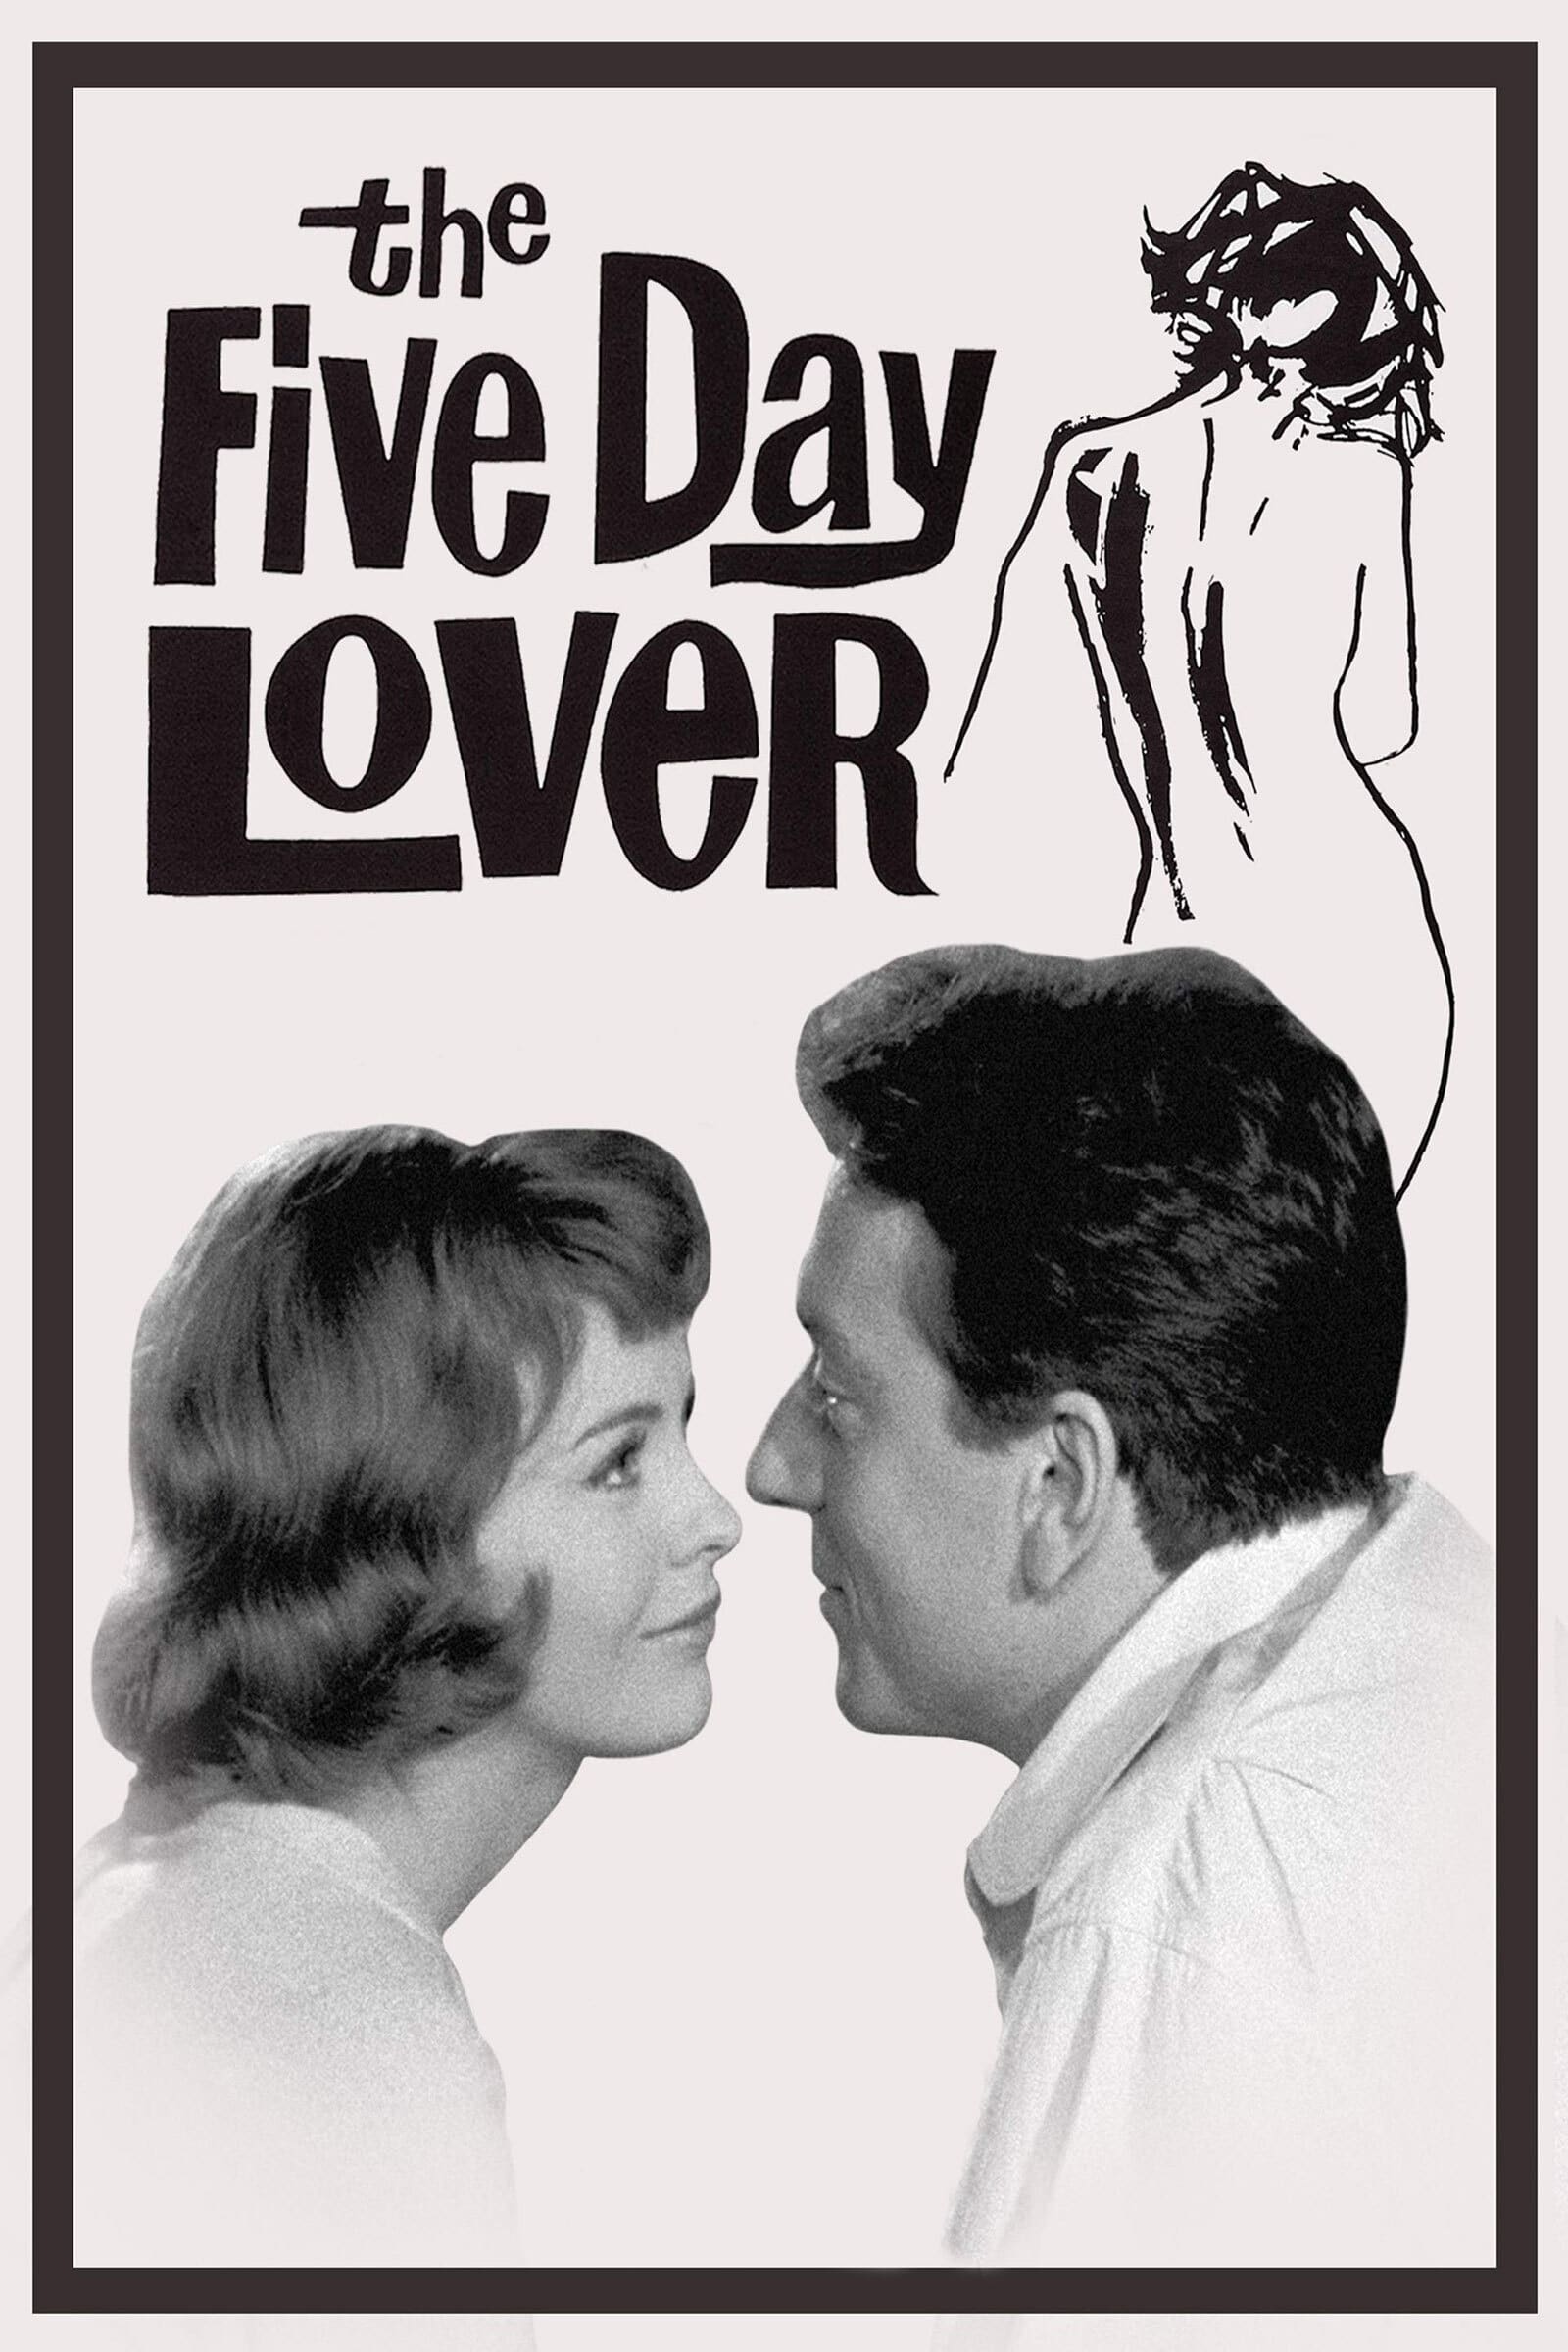 Five Day Lover (1961)